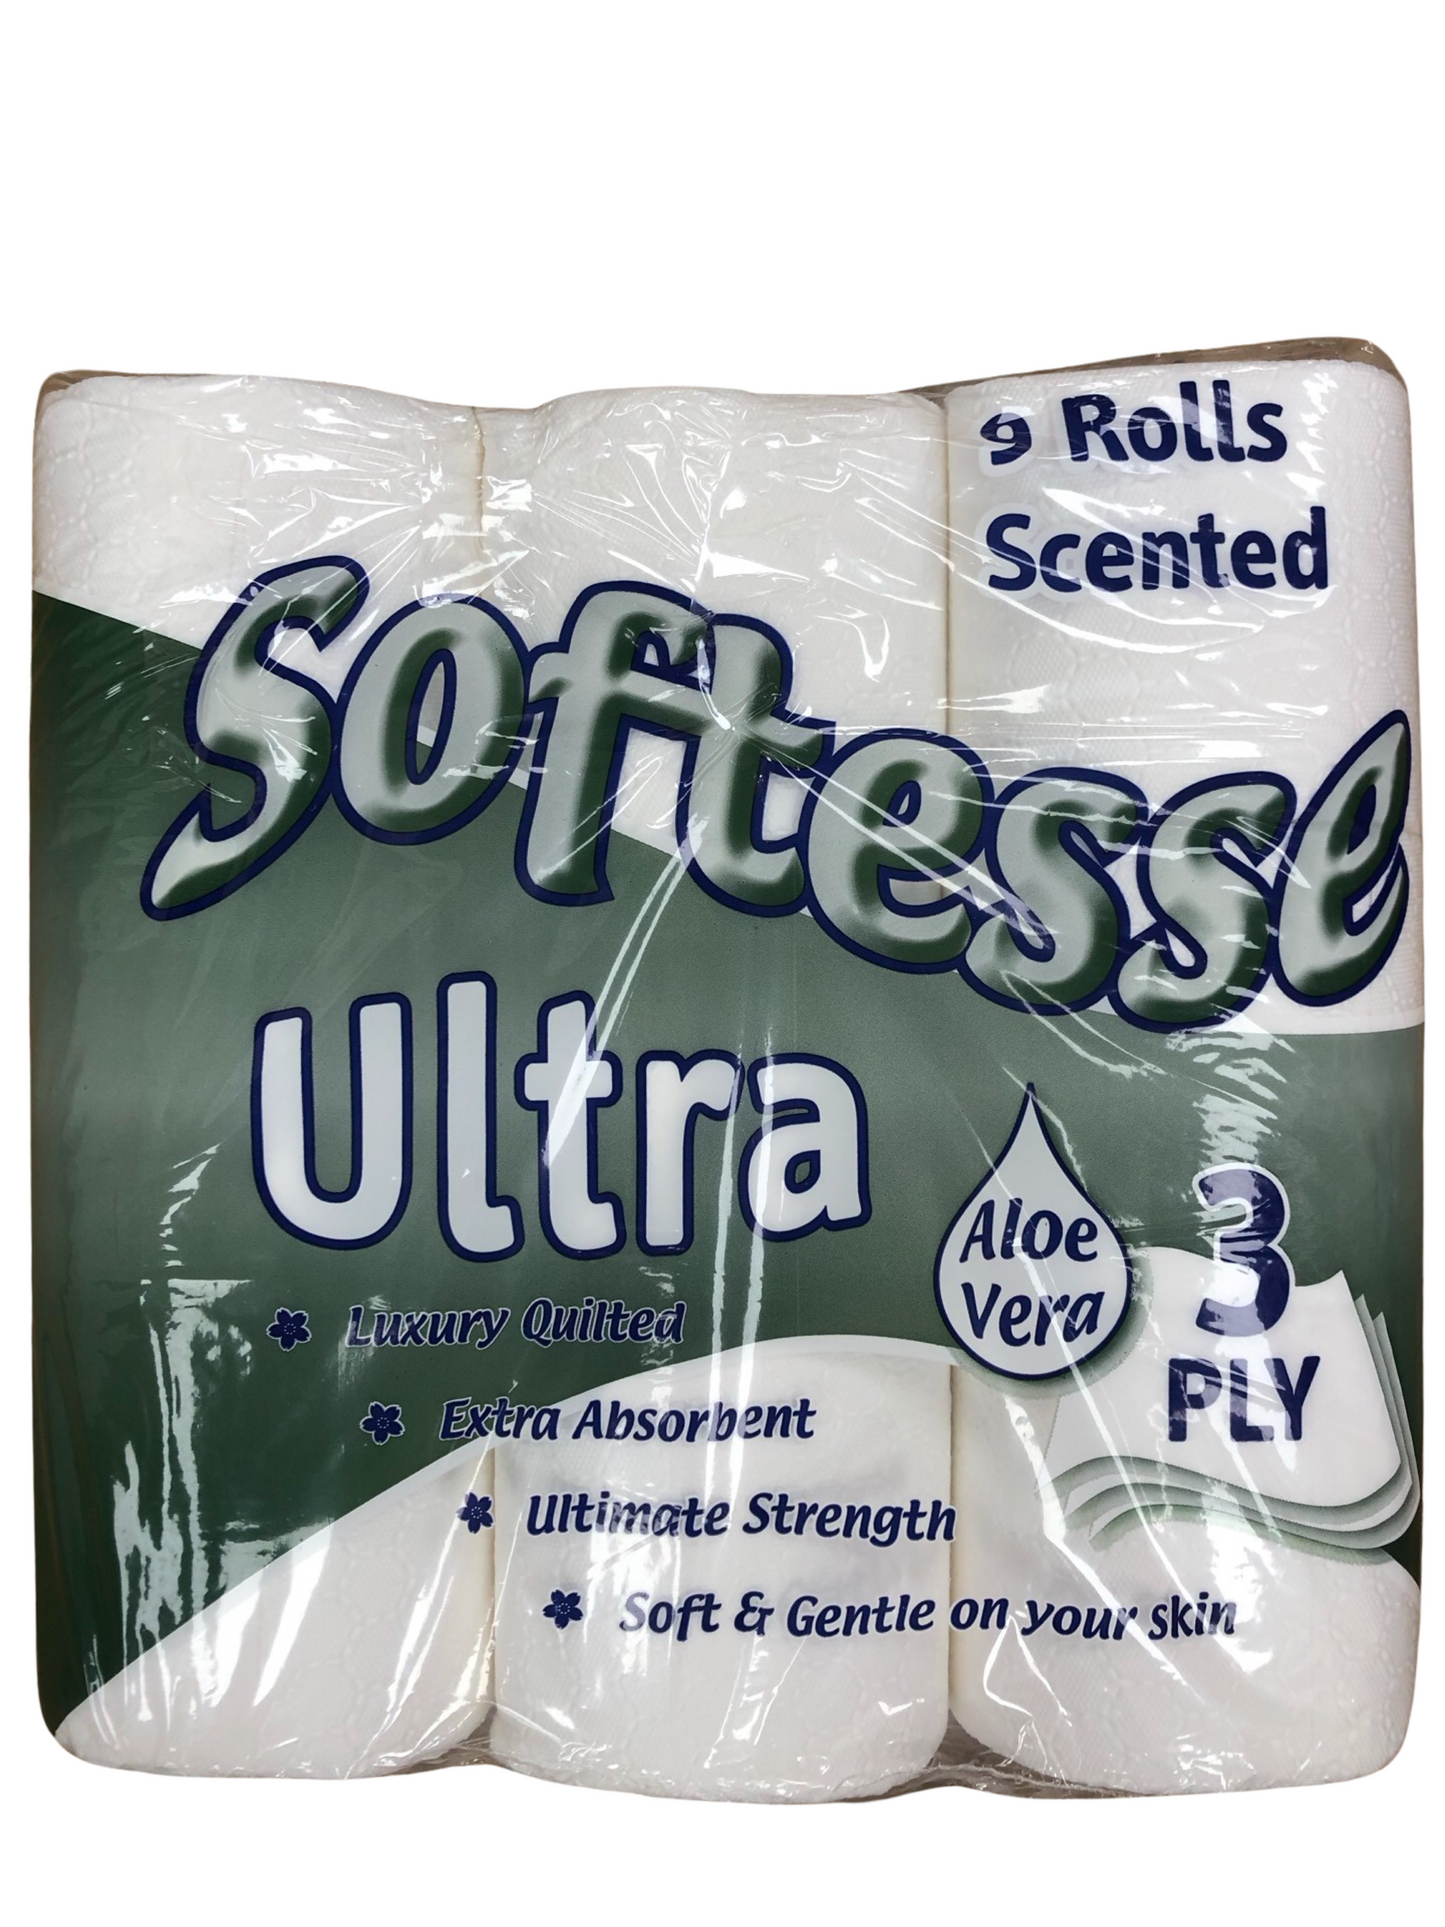 Softesse Ultra luxury 3ply quilted toilet roll. 9 rolls Aloe Vera scented